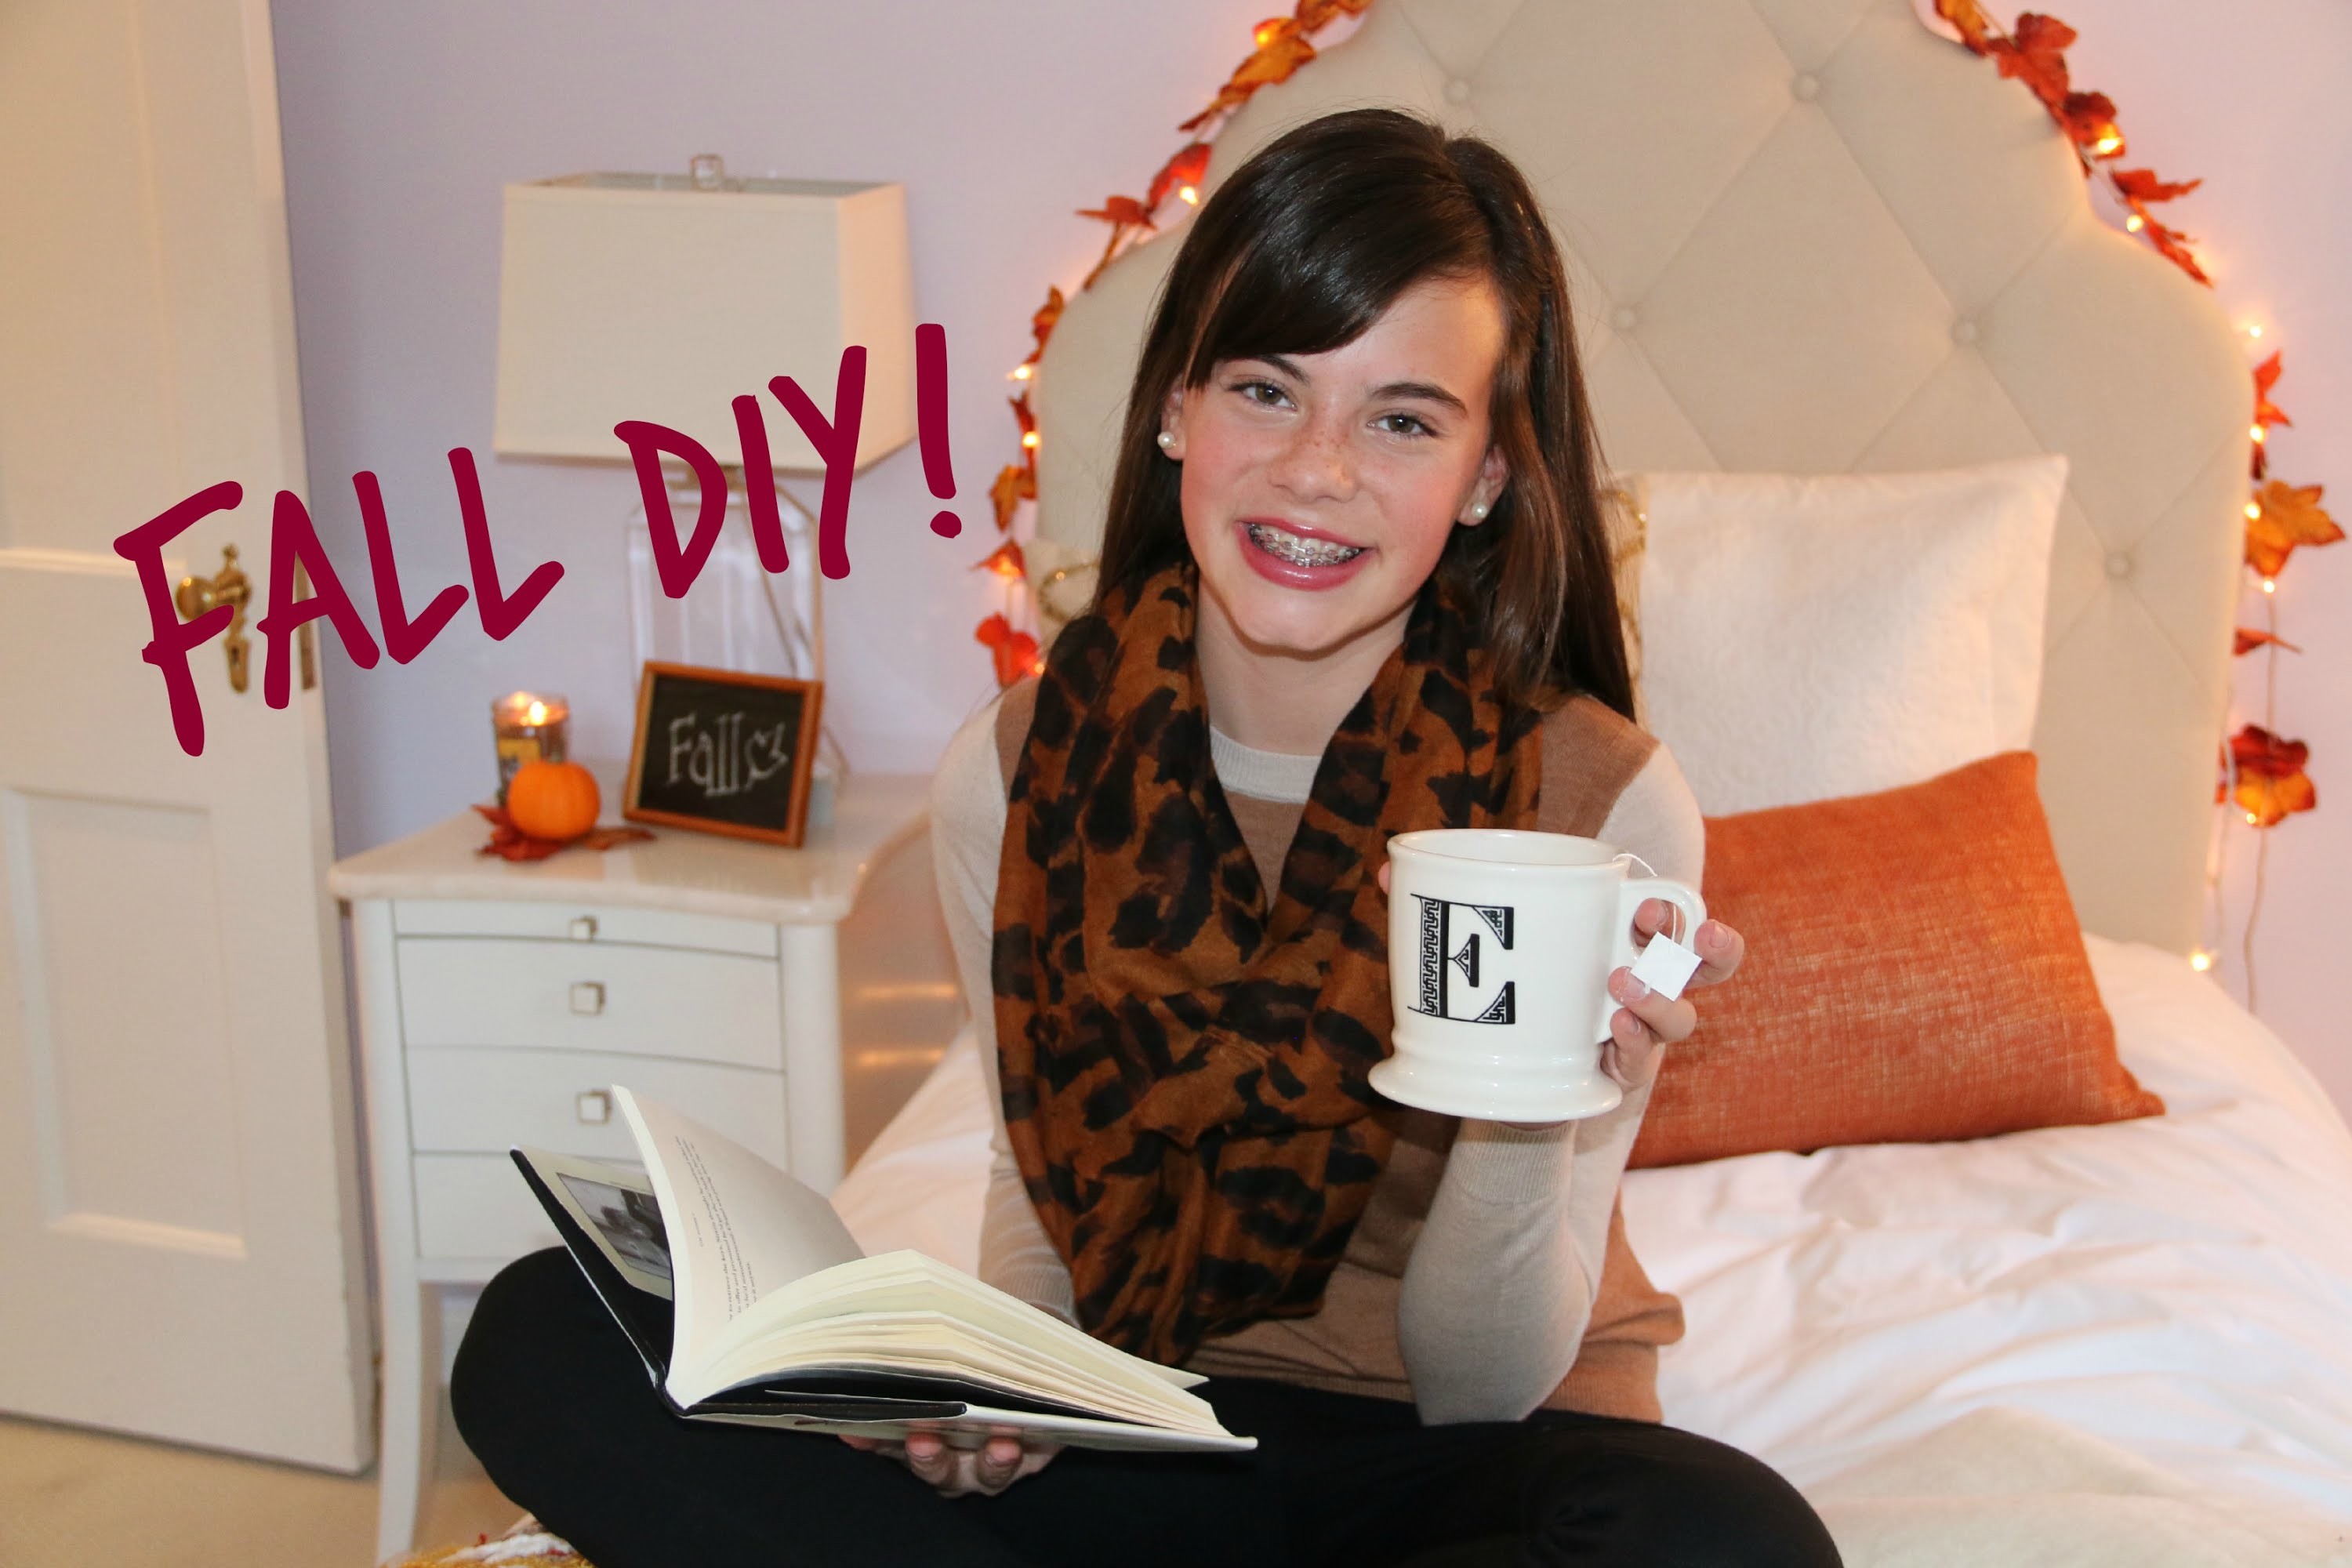 DIY Fall Room Decor, Sweet Treat, & Easy Ways To Cozy Up Your Room!